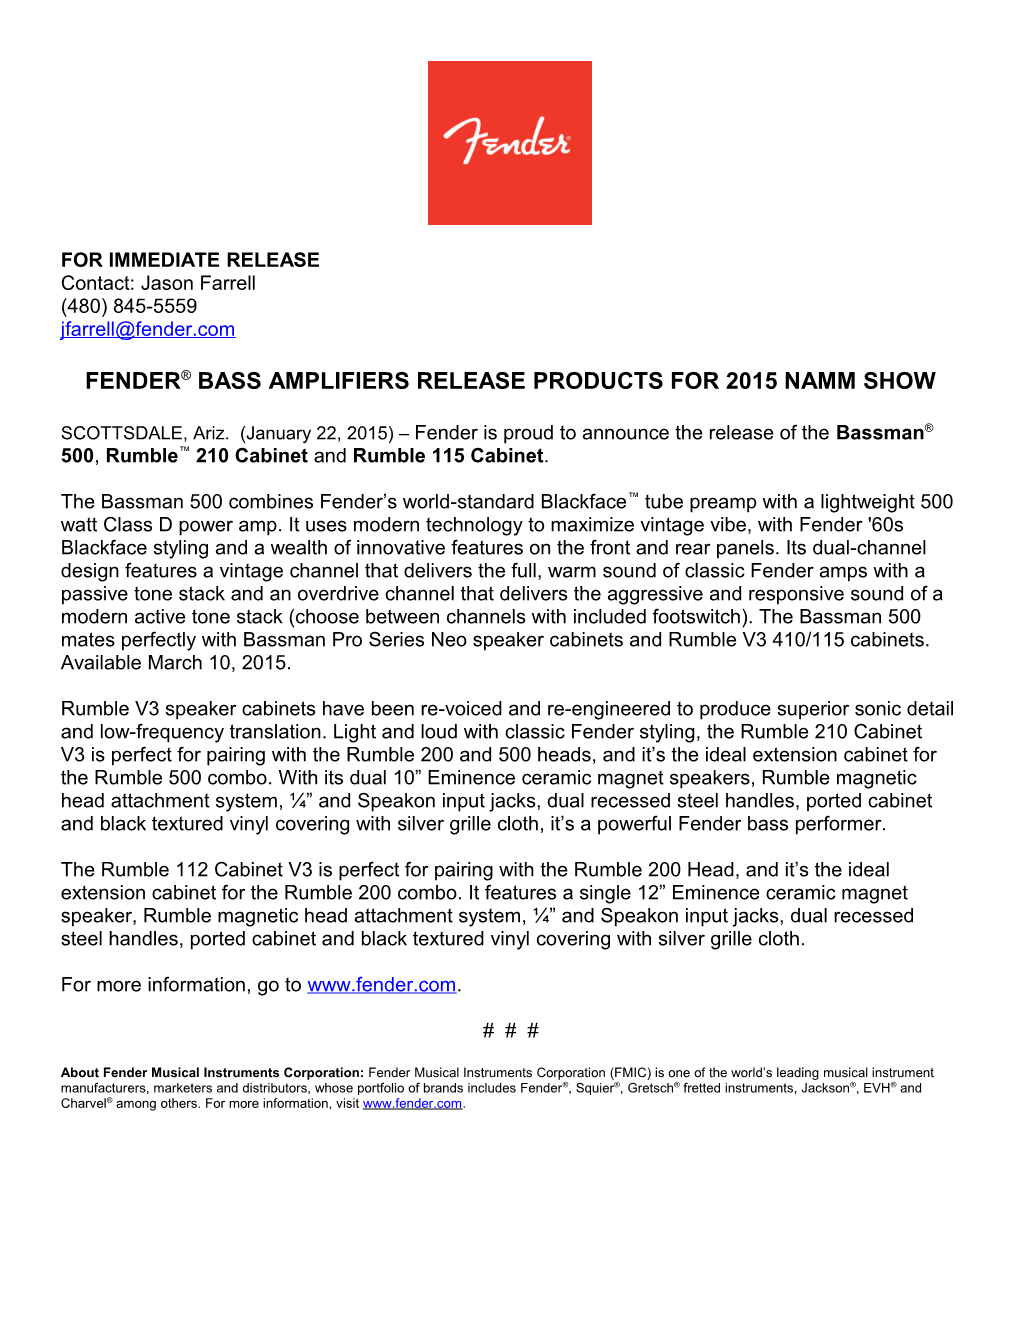 Fender Bass Amplifiers Release Products for 2015 Namm Show